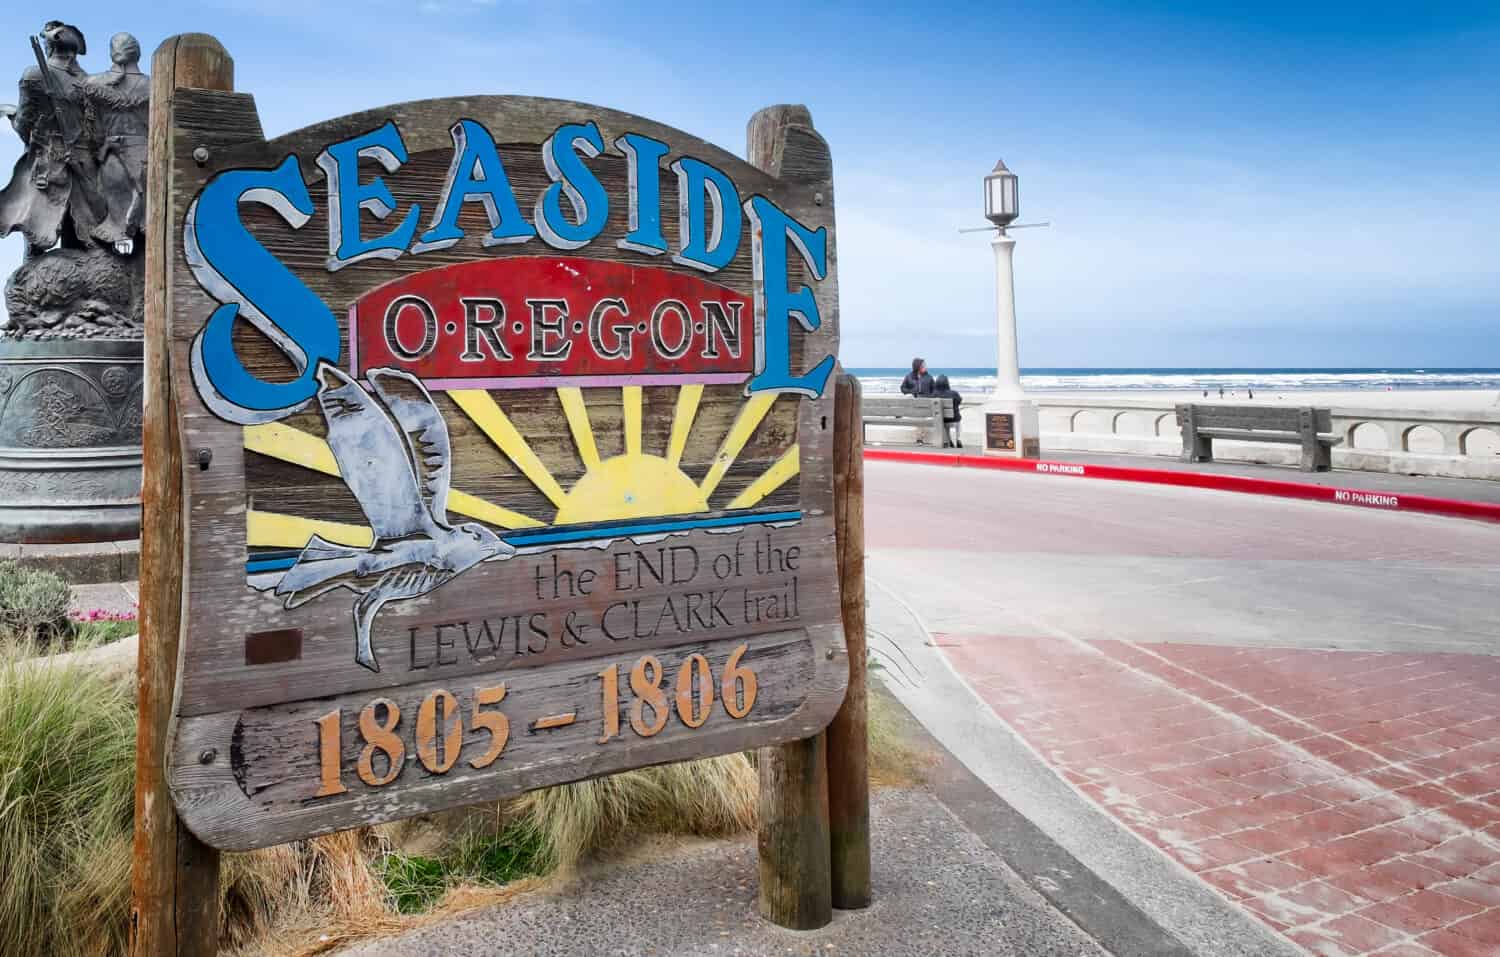 Seaside, Oregon sign commemorating its historic connection to the famous explorers Lewis & Clark, who ended their journey at this spot. A bronze statue of them and the ocean are in the background.